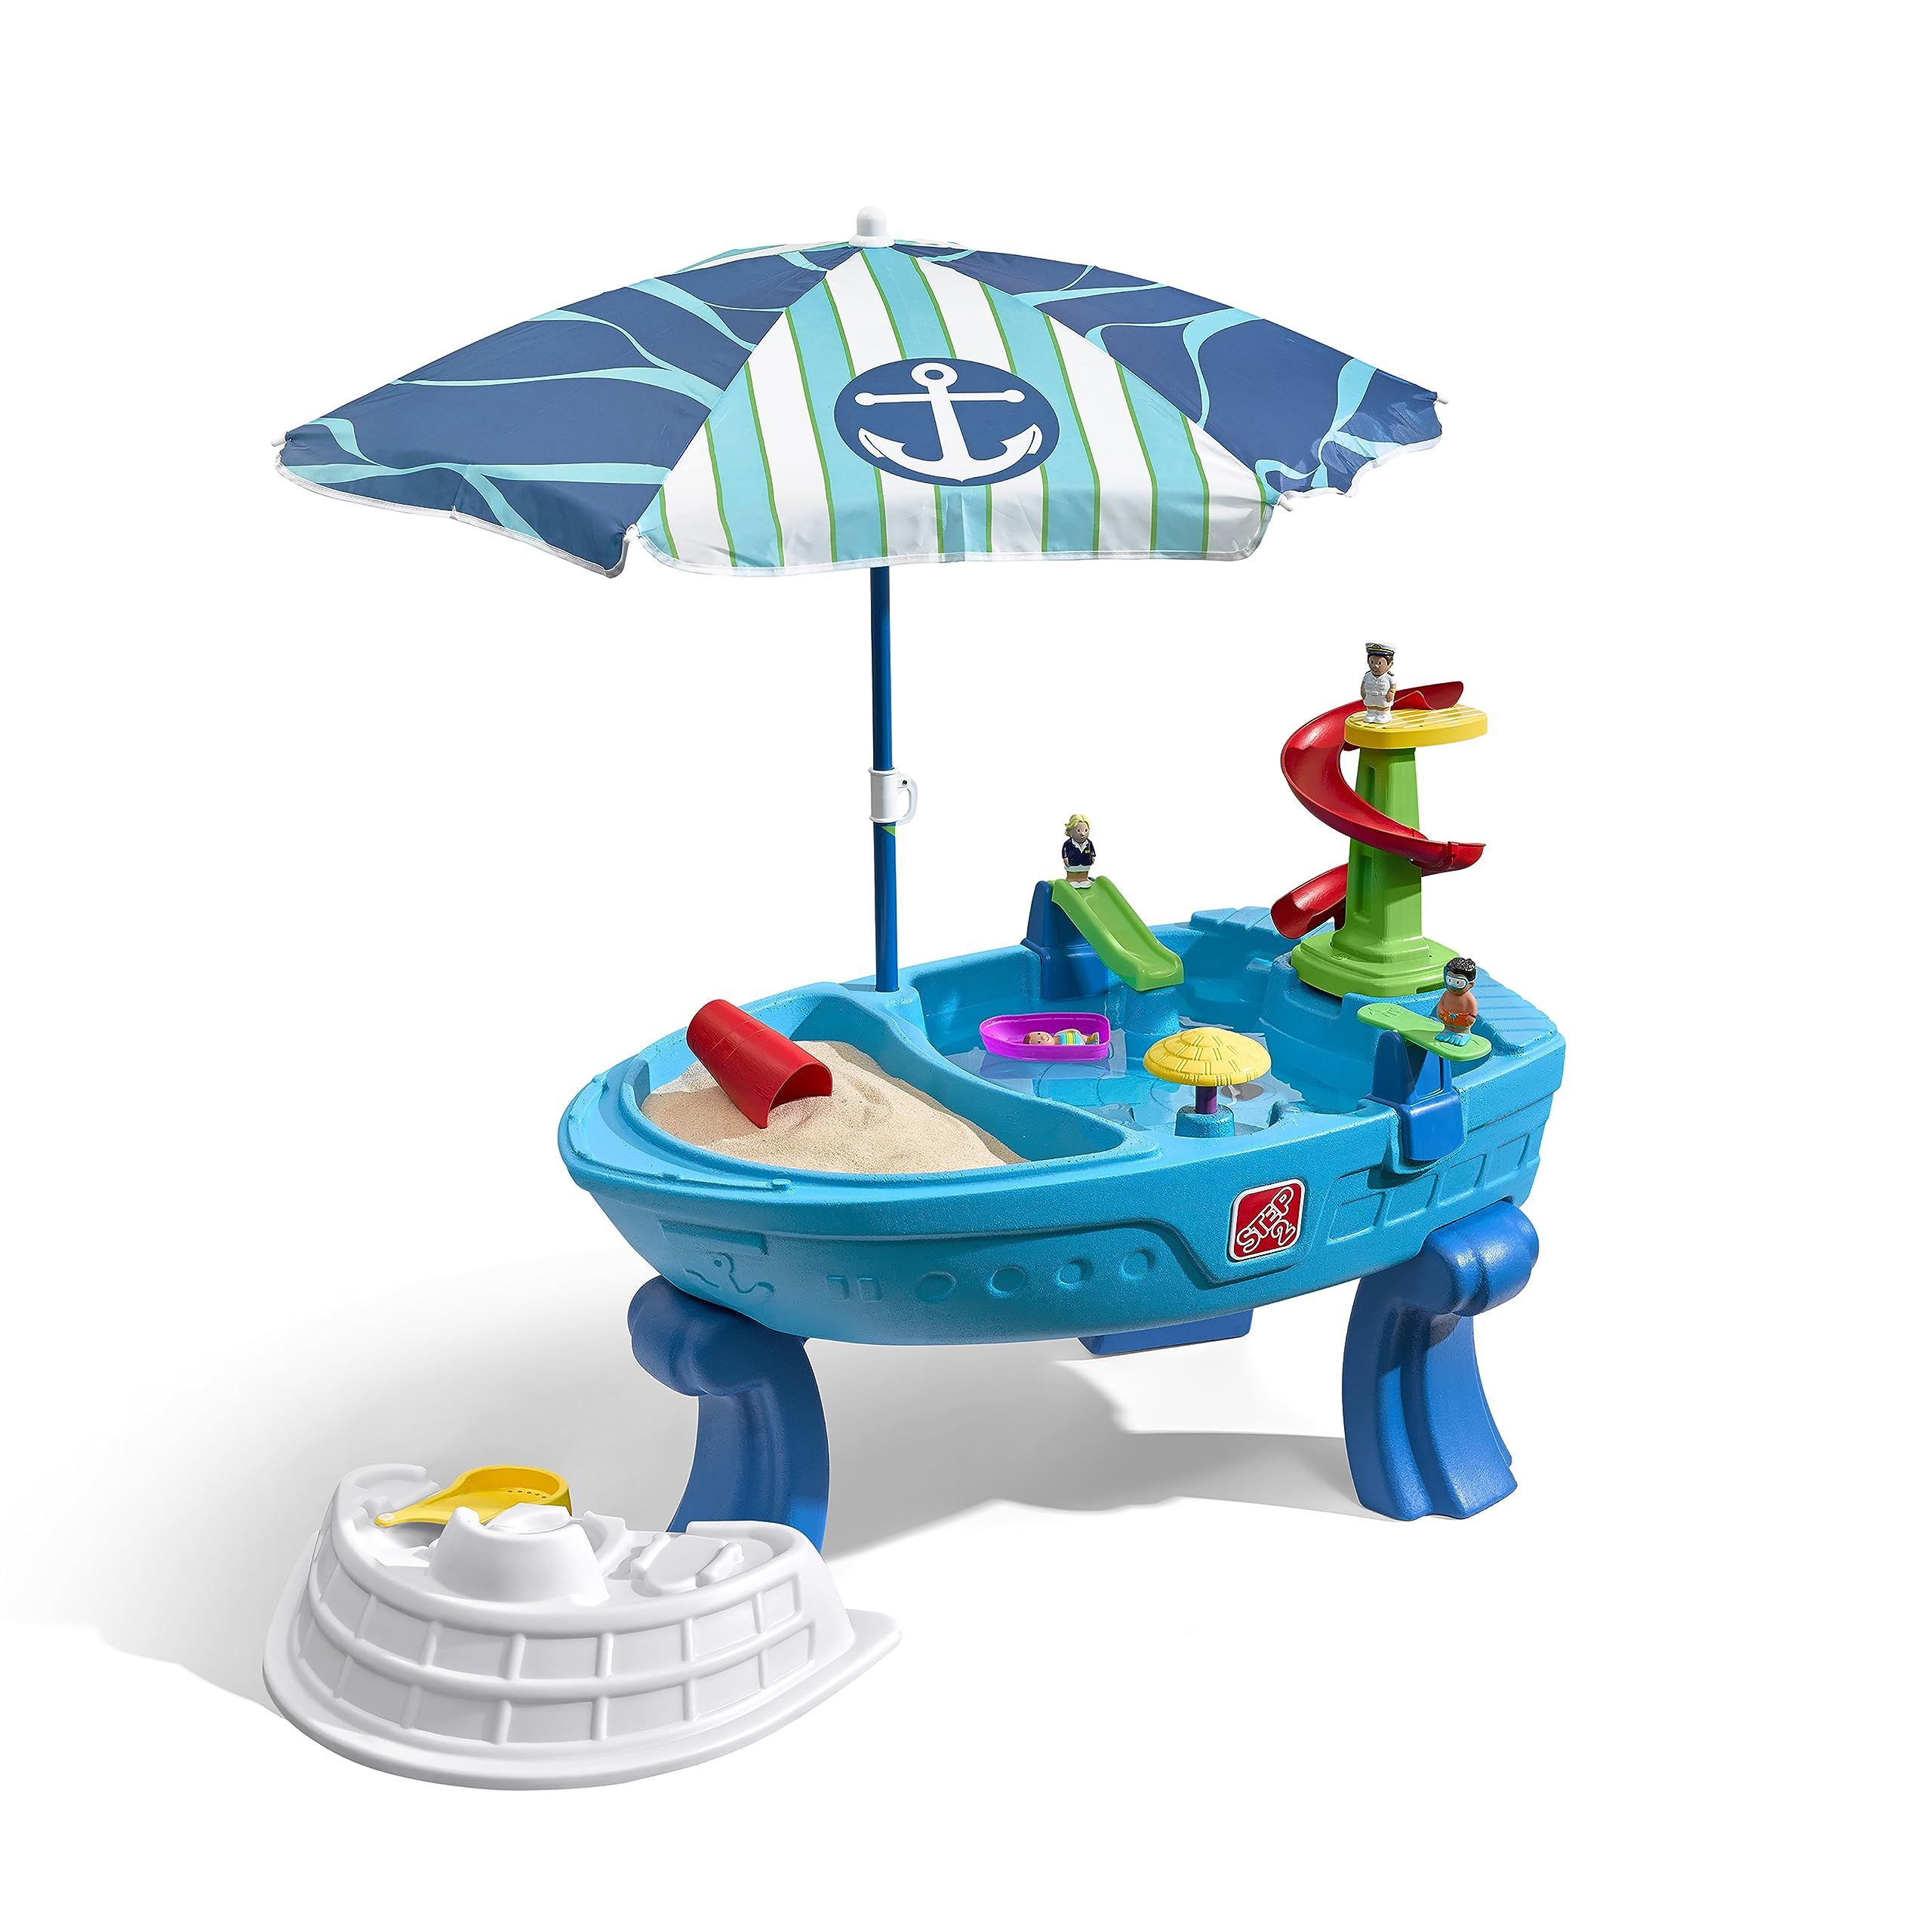 Step2 Fiesta Cruise Sand & Water Table with Umbrella for Kids, 10 Piece Accessory Kit, Toddler Summer Outdoor/Indoor Toy, Ages 2+, Multicolor | Amazon (US)